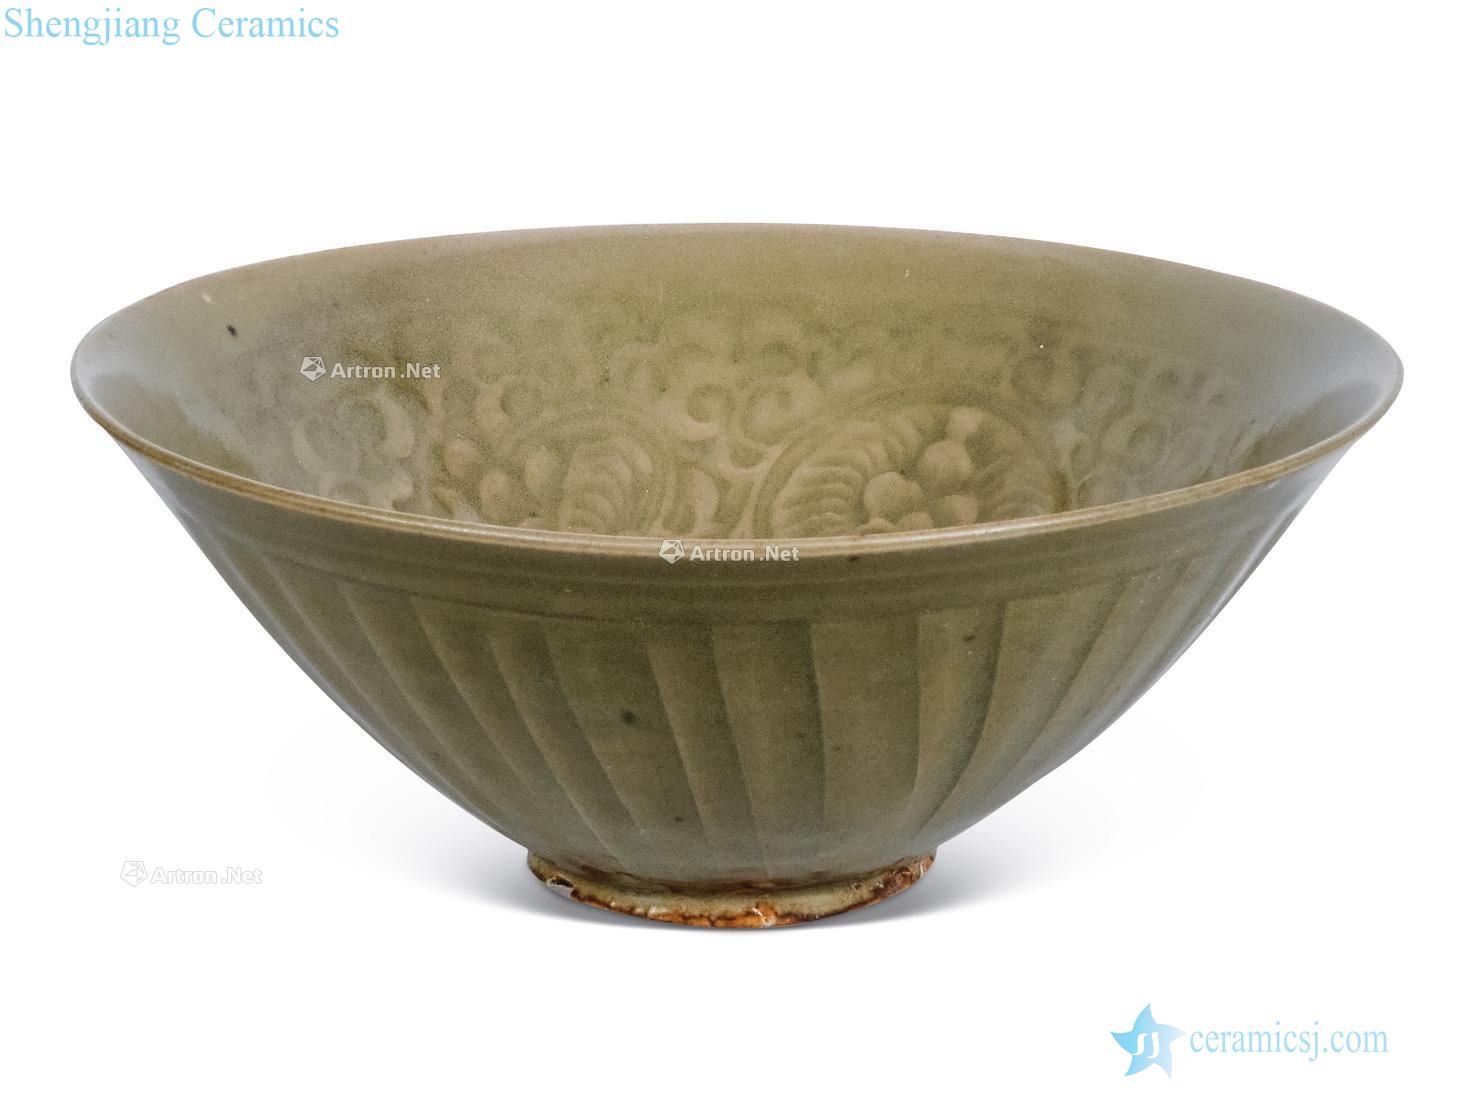 The song of the kiln cross grain 盌 flowers